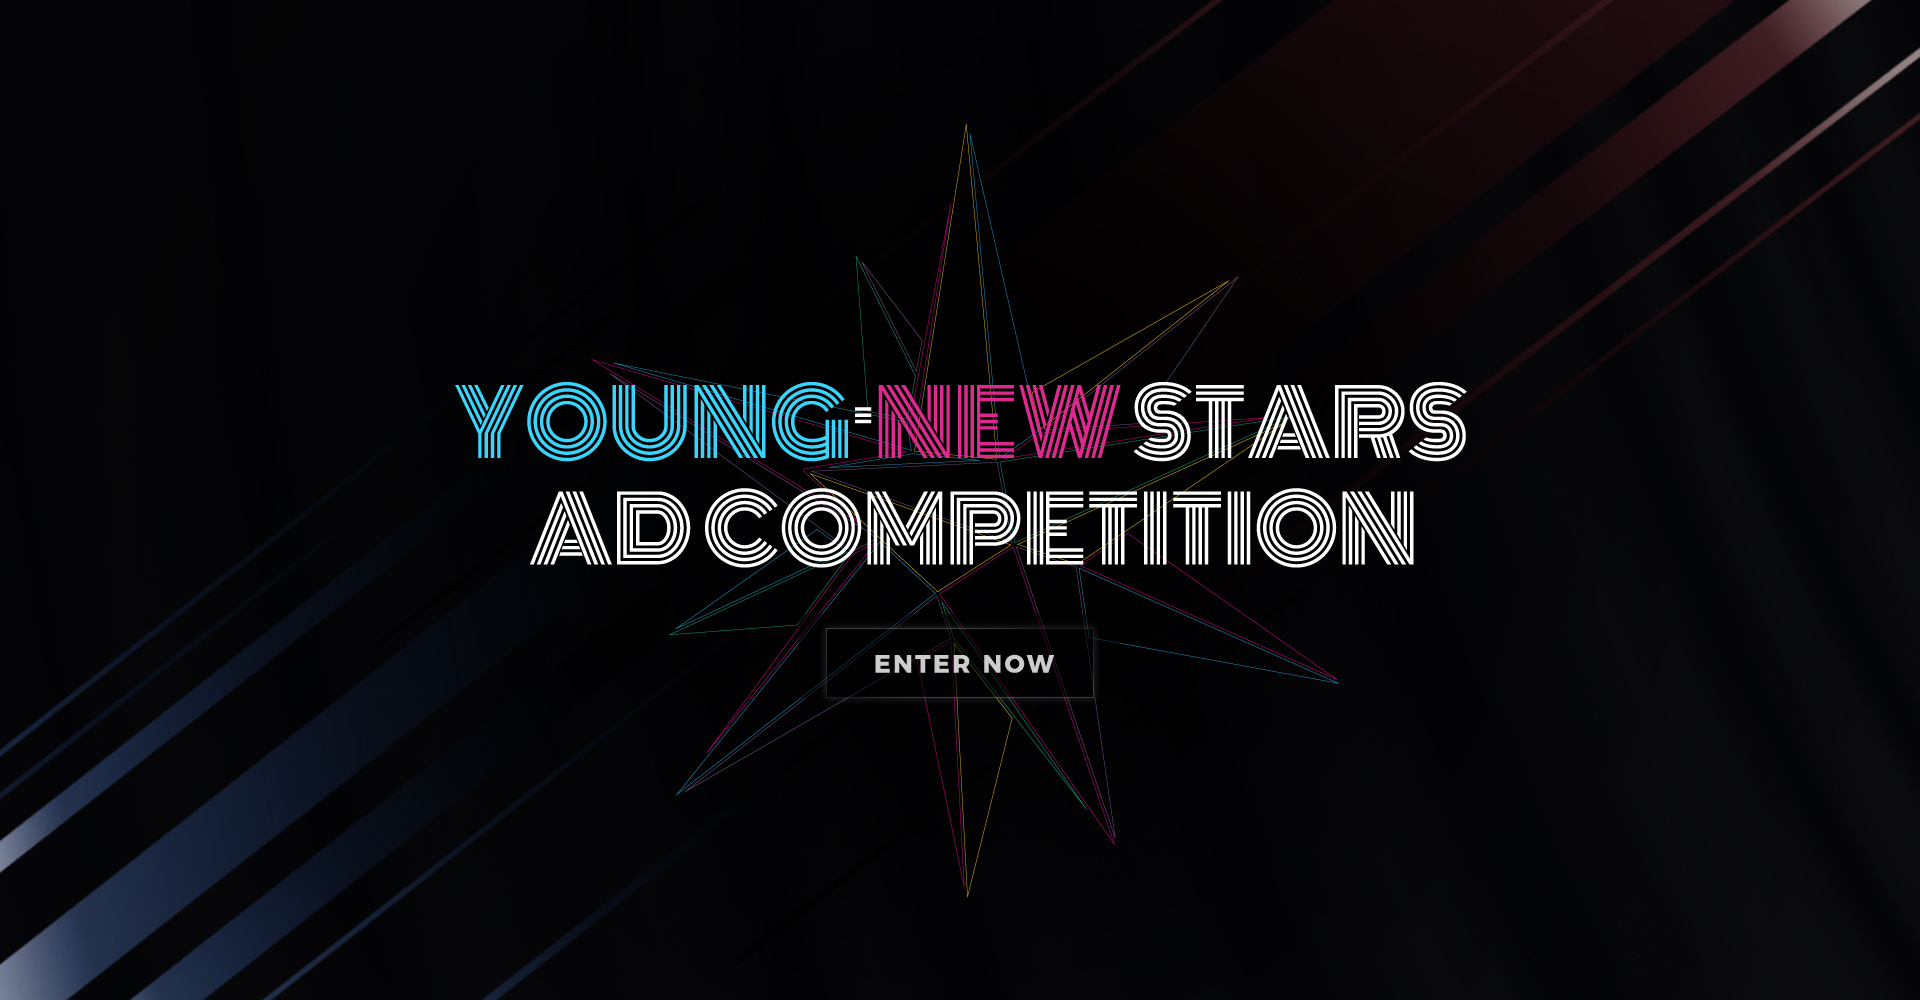 【AD STARS】YOUNG / NEW STARS AD COMPETITION 線上徵件開跑摟！